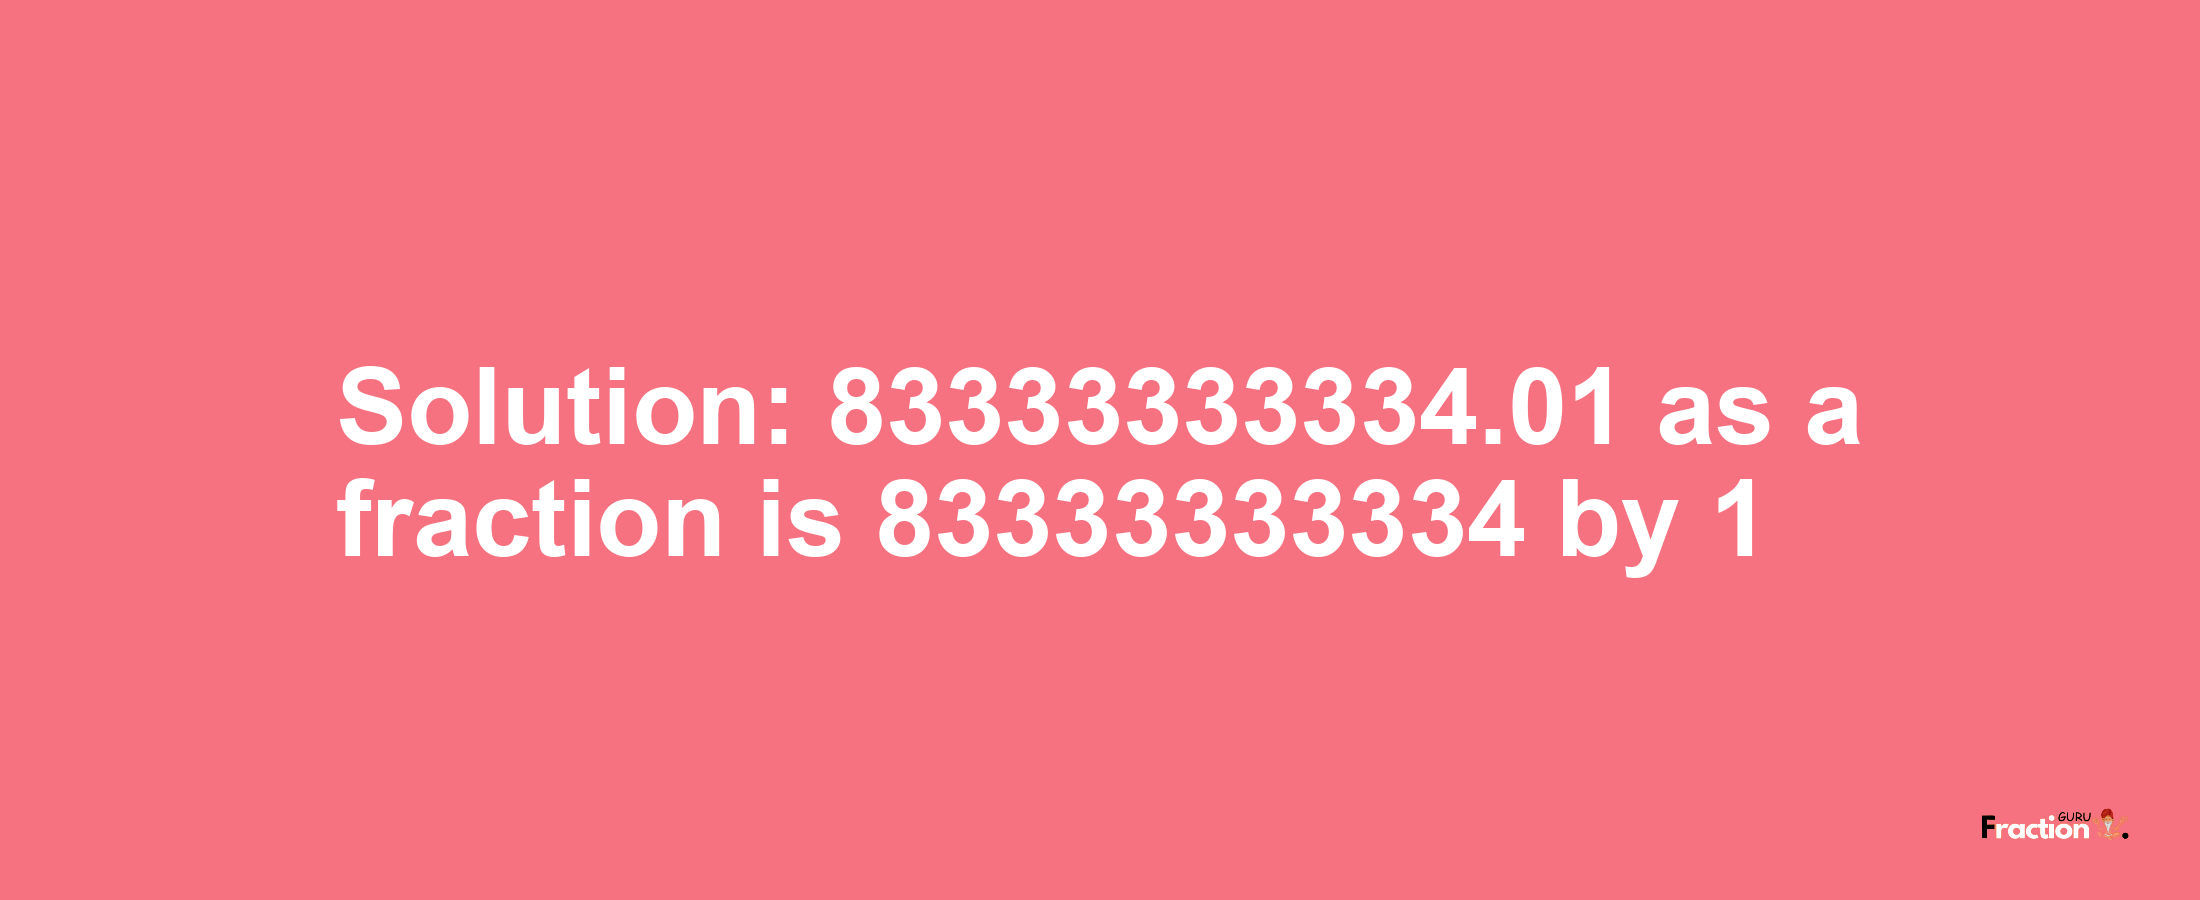 Solution:83333333334.01 as a fraction is 83333333334/1